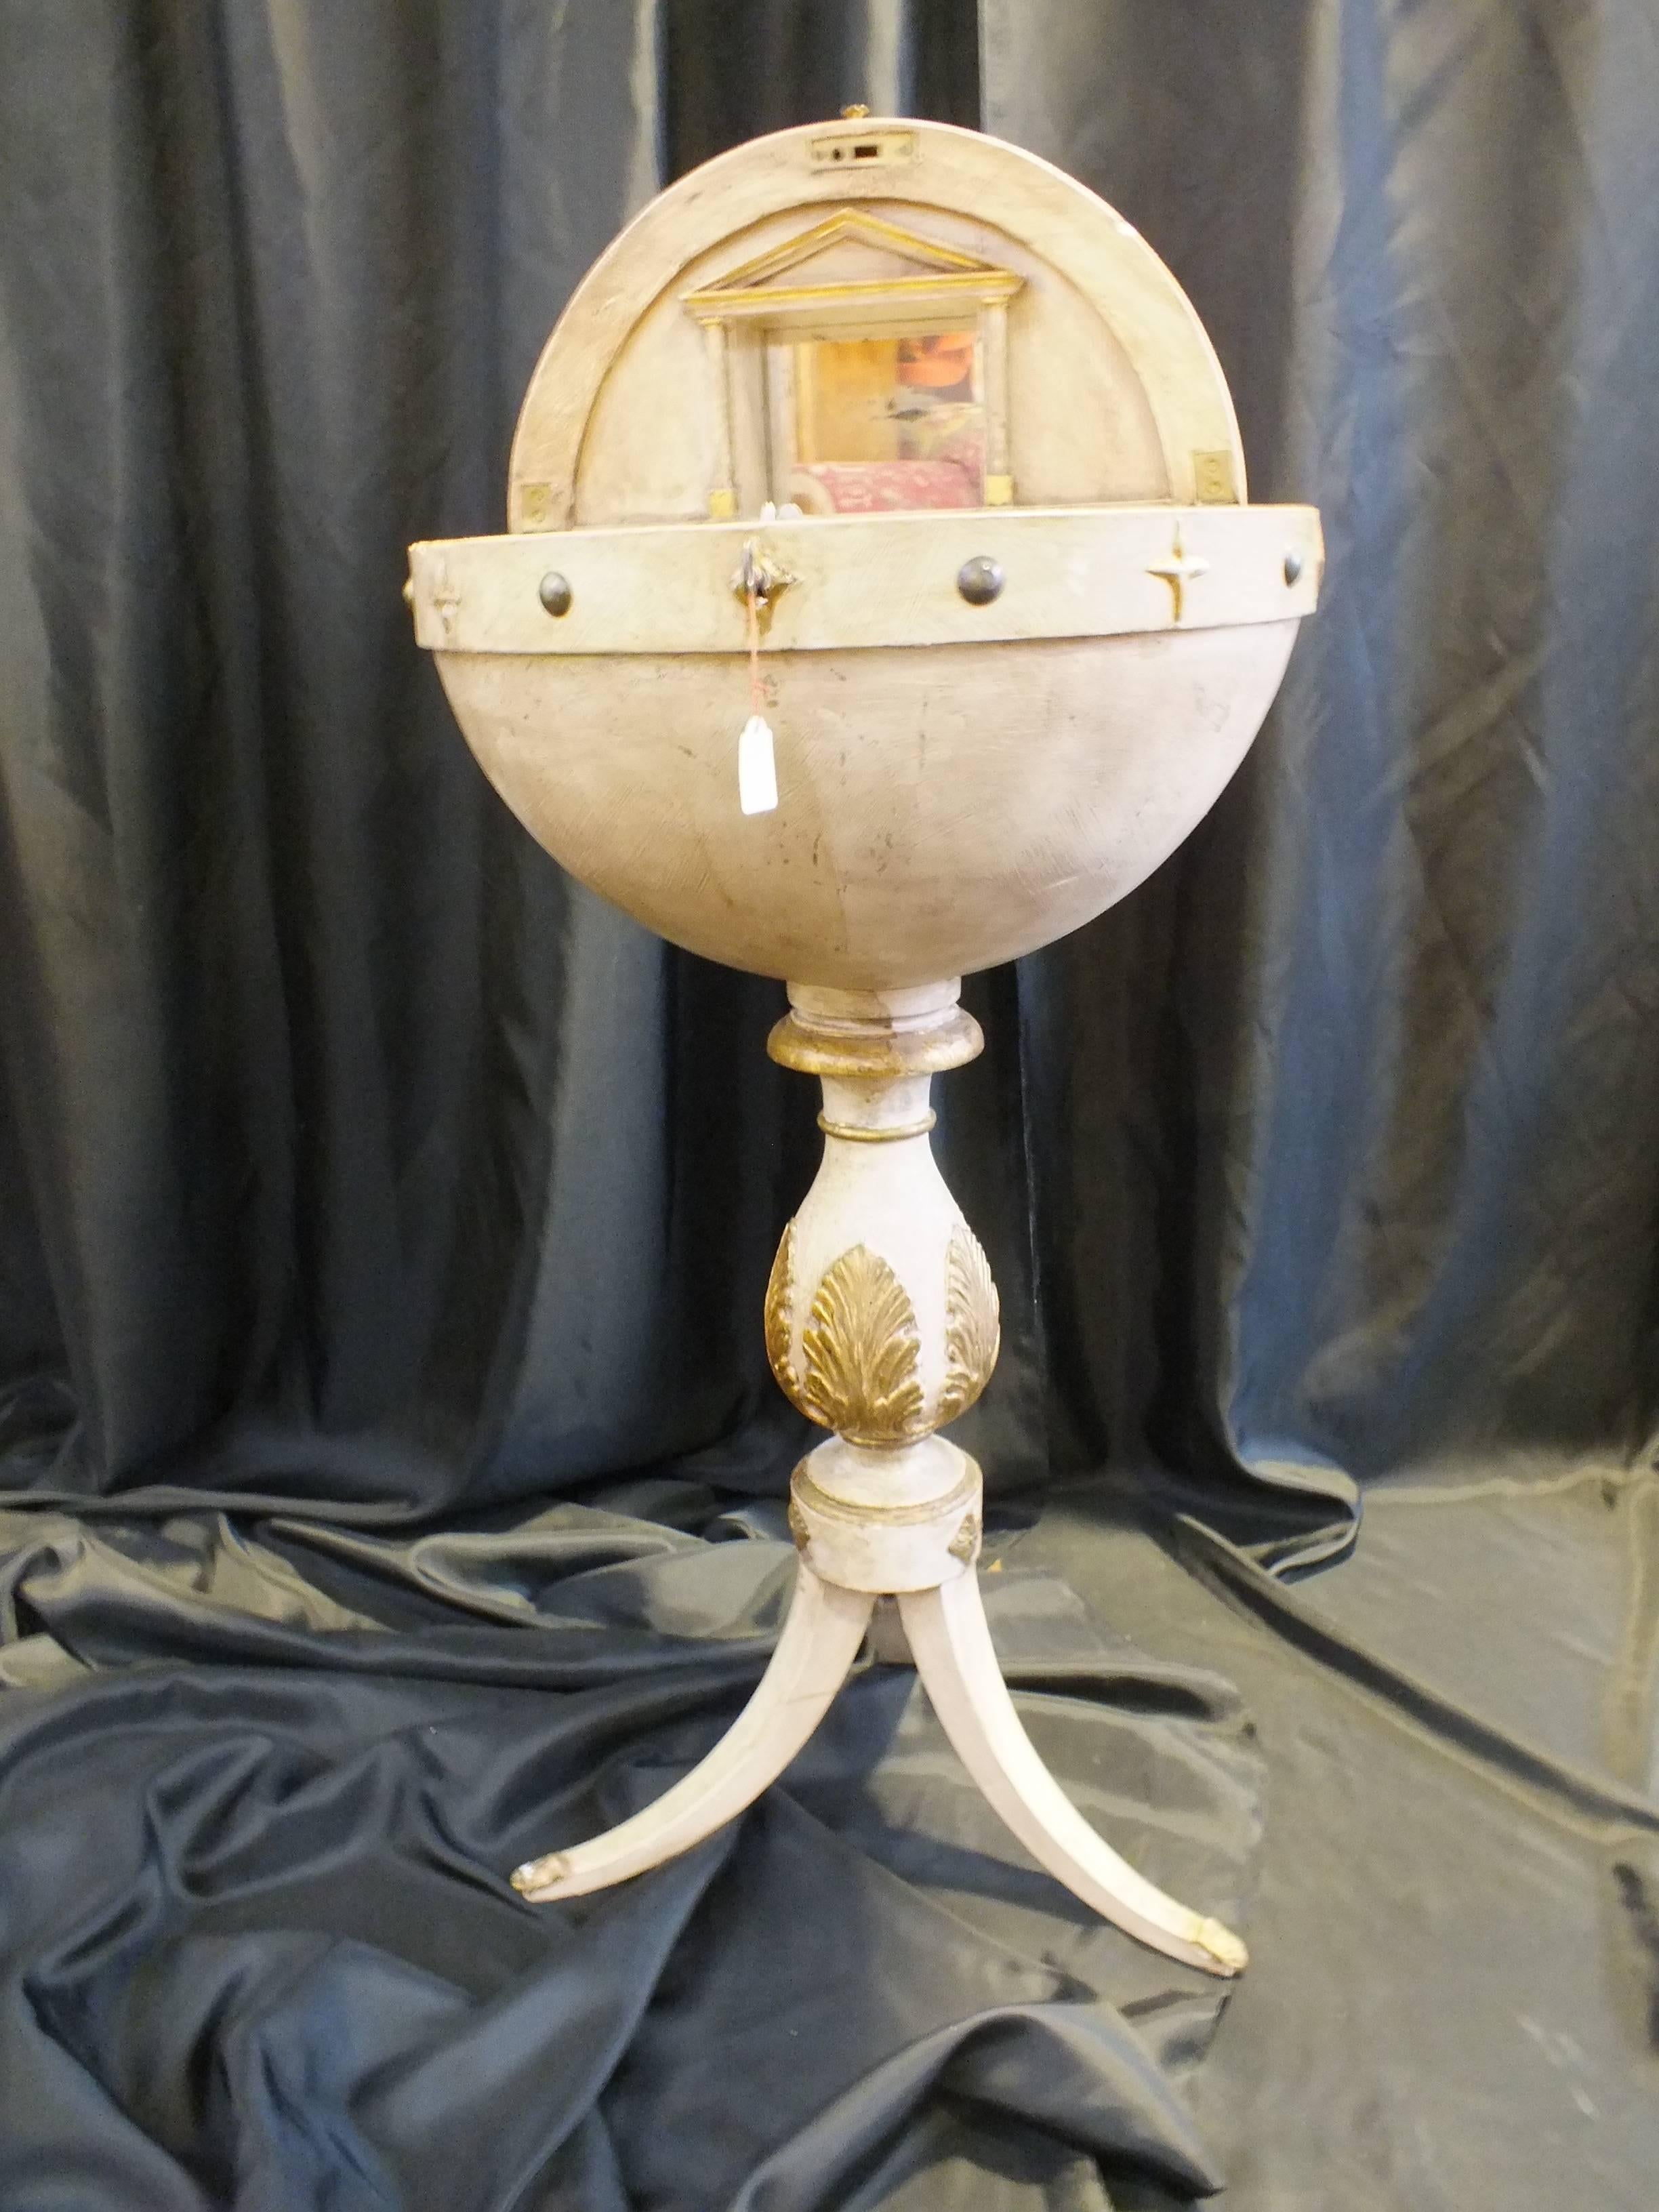 "Globe" Little sewing table
- Munich 1820
- surface grafted with lime glue
- 22 carat gilded
- single item with secret drawer and mirror deposits


- shipping quote available on request